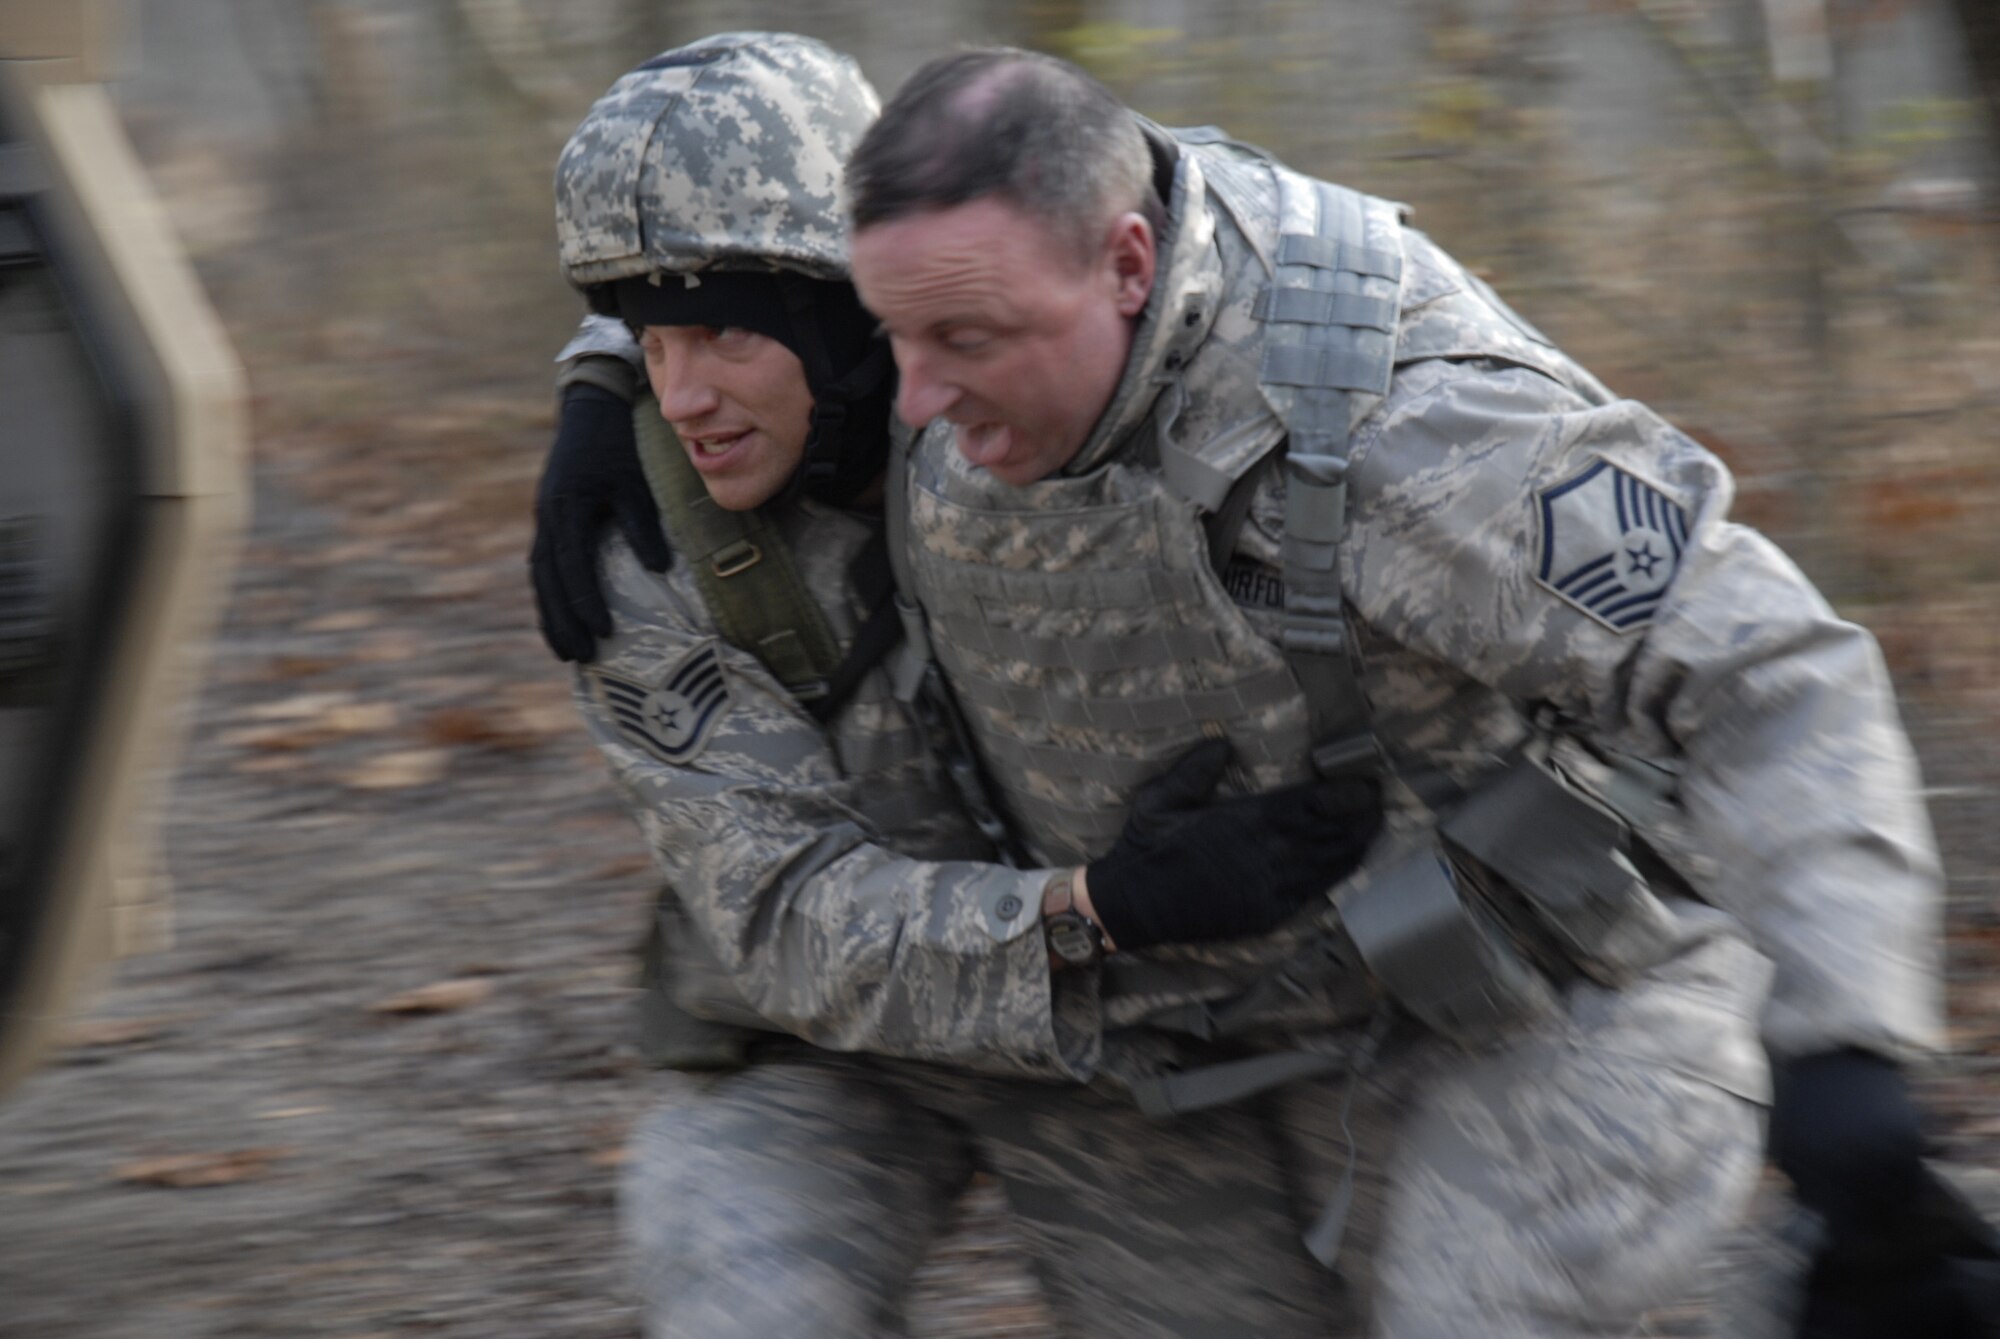 A student in the U.S. Air Force Expeditionary Center's Phoenix Warrior Training Course moves an "injured Airman" during a scenario for convoy operations training in the course Dec. 5, 2008, on a Fort Dix, N.J., range.  The course is taught by the Center's 421st Combat Training Squadron and prepares security forces Airmen for upcoming deployments. (U.S. Air Force Photo/Staff Sgt. Paul R. Evans)